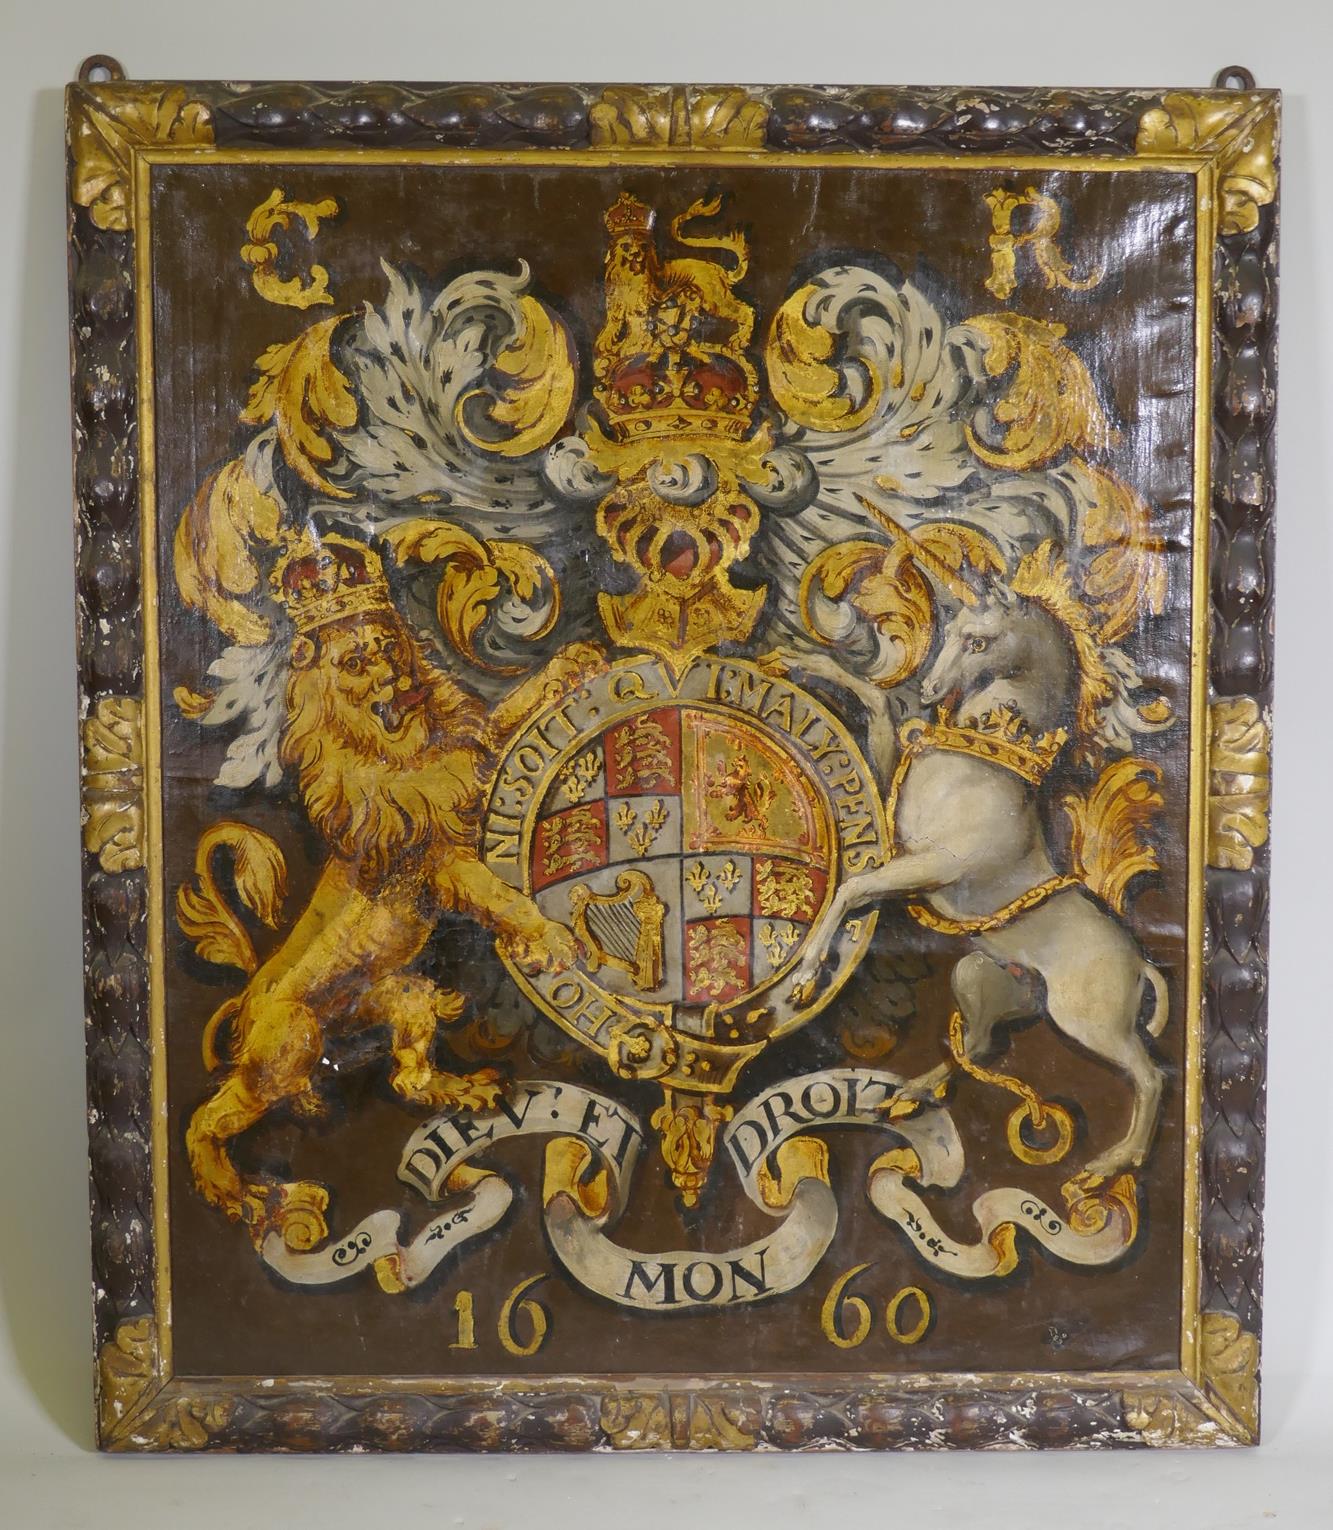 Heraldic painting depicting the Royal Coat of Arms of Charles I, oil on canvas with parcel gilt